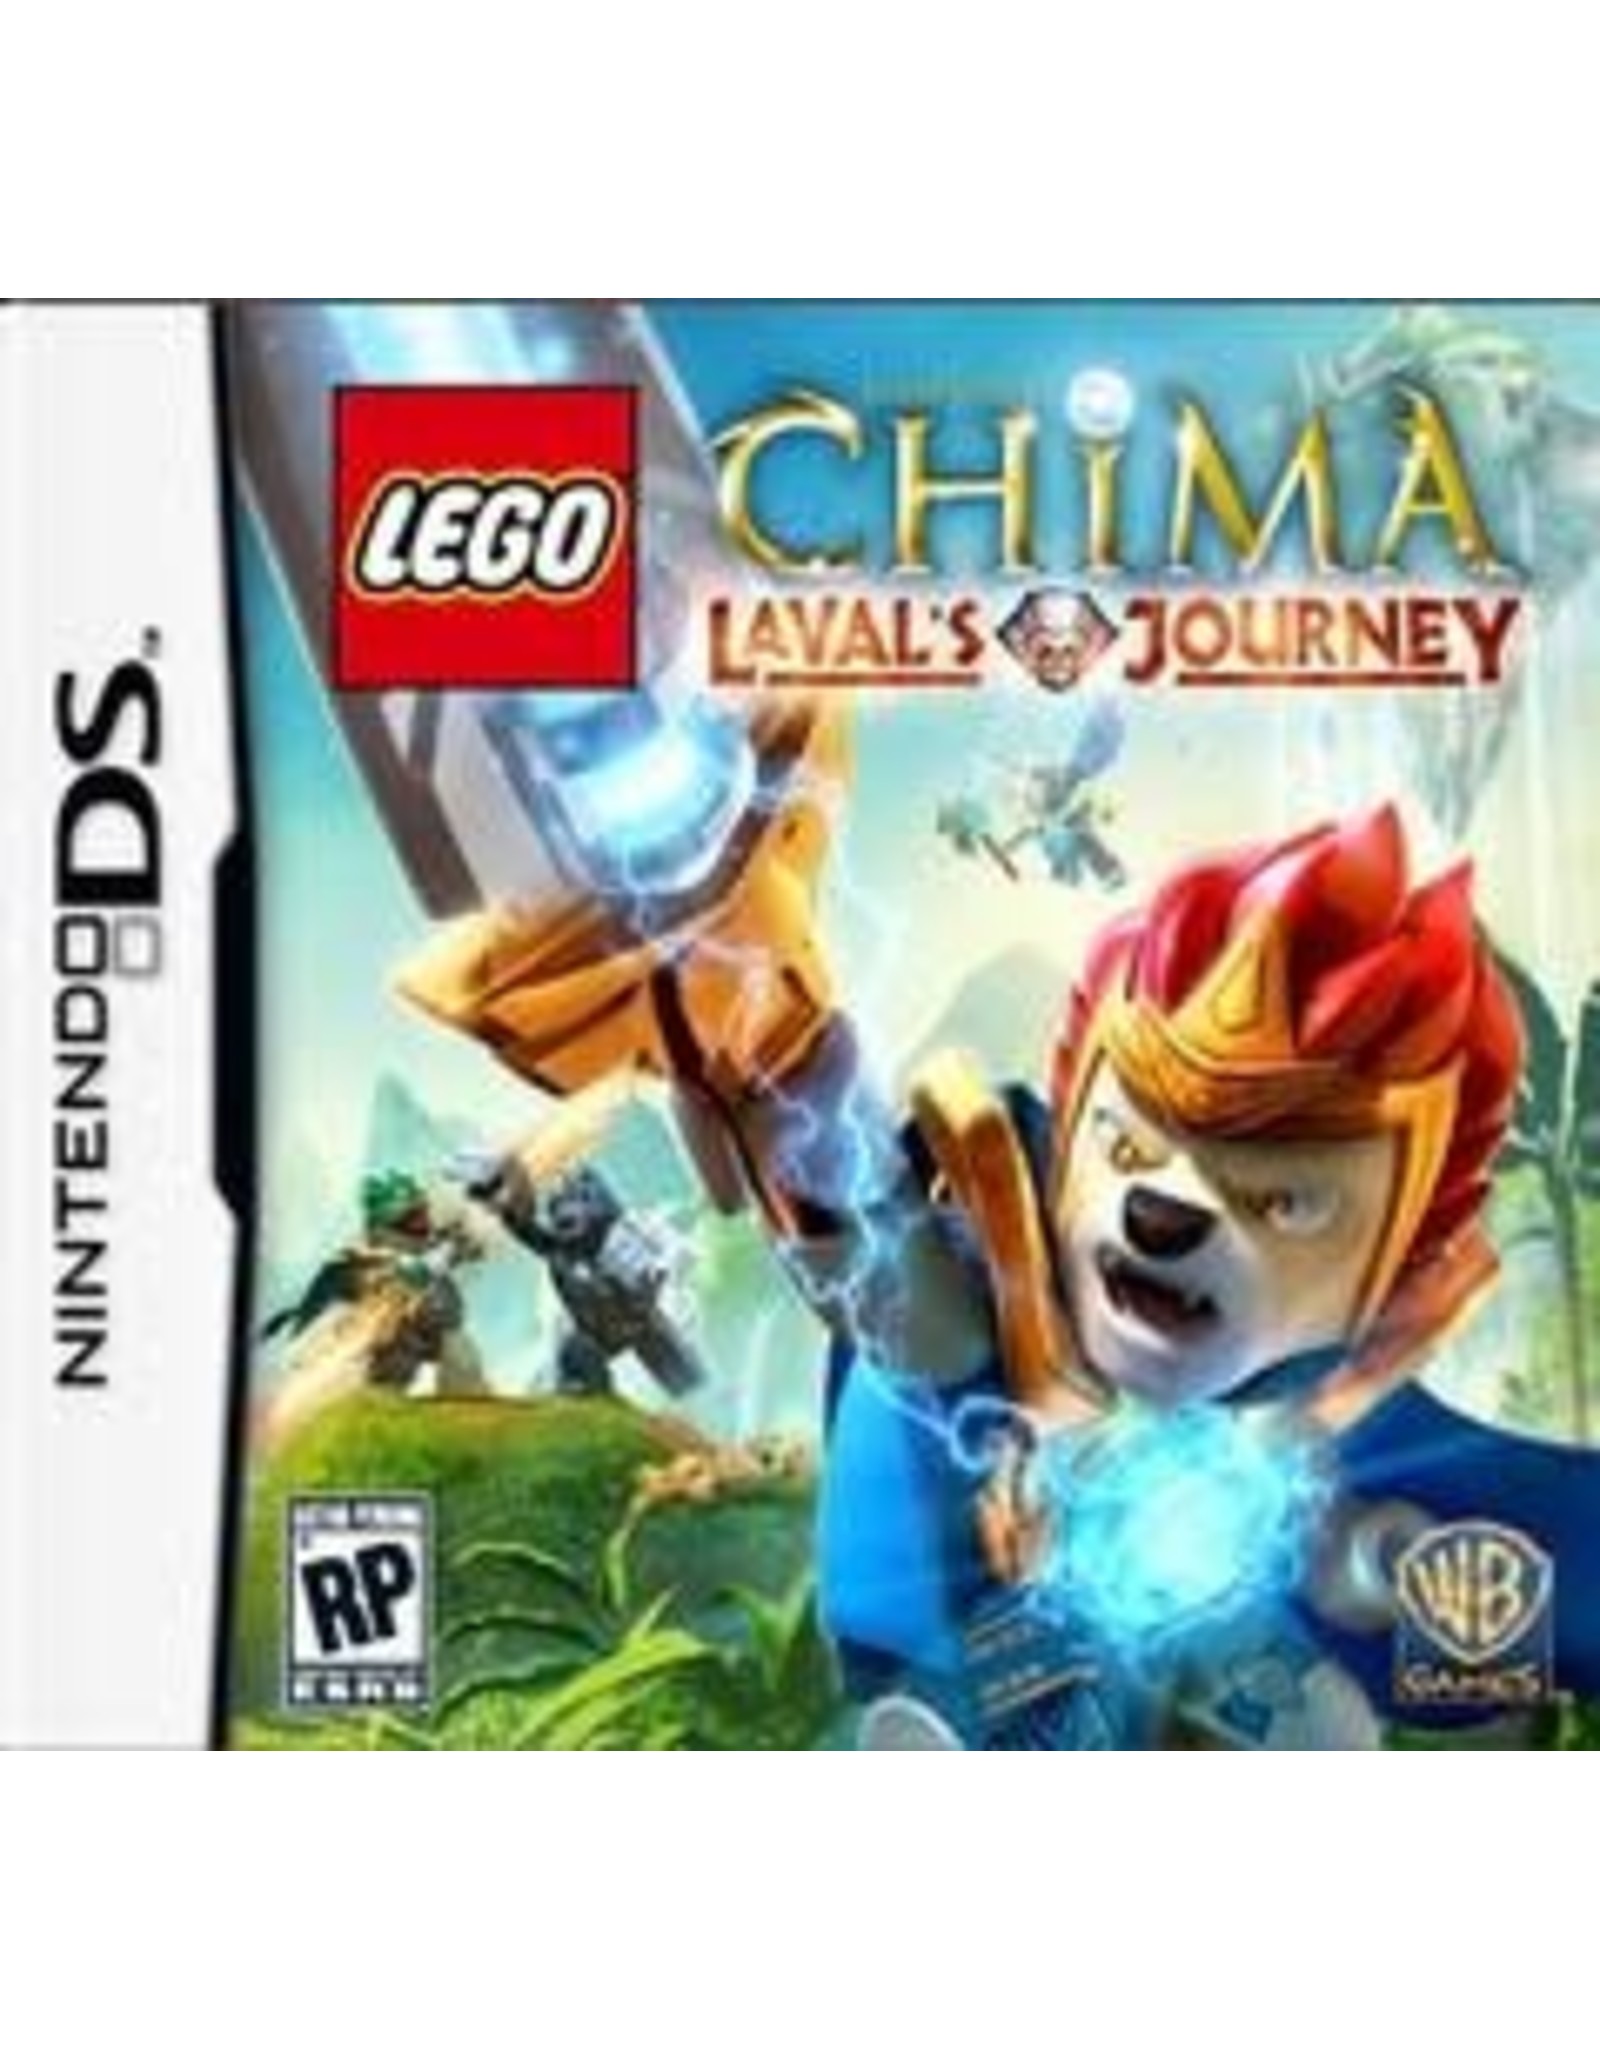 Nintendo DS LEGO Legends of Chima: Laval's Journey (Cart Only)